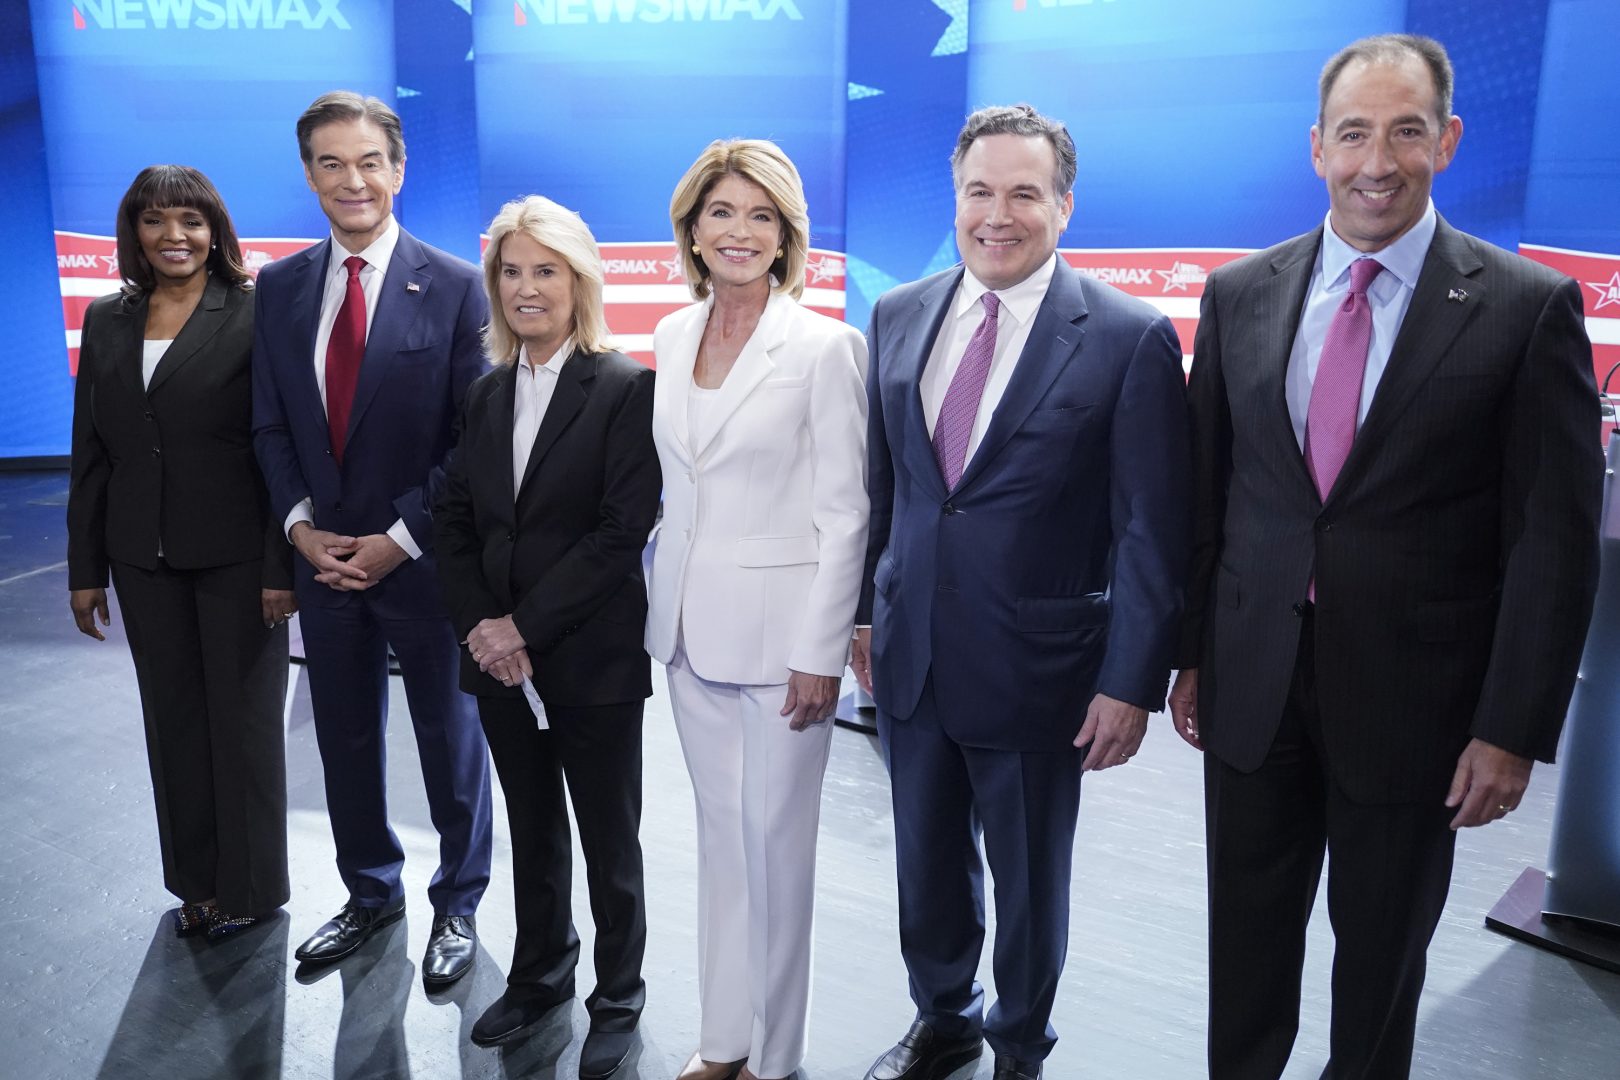 Kathy Barnette, Mehmet Oz, moderator Greta Van Susteren, Carla Sands, David McCormick, and Jeff Bartos, (left to right) pose for photo before they take part in a debate for Pennsylvania U.S. Senate Republican candidates, Wednesday, May 4, 2022, in Grove City, Pa. (AP Photo/Keith Srakocic)